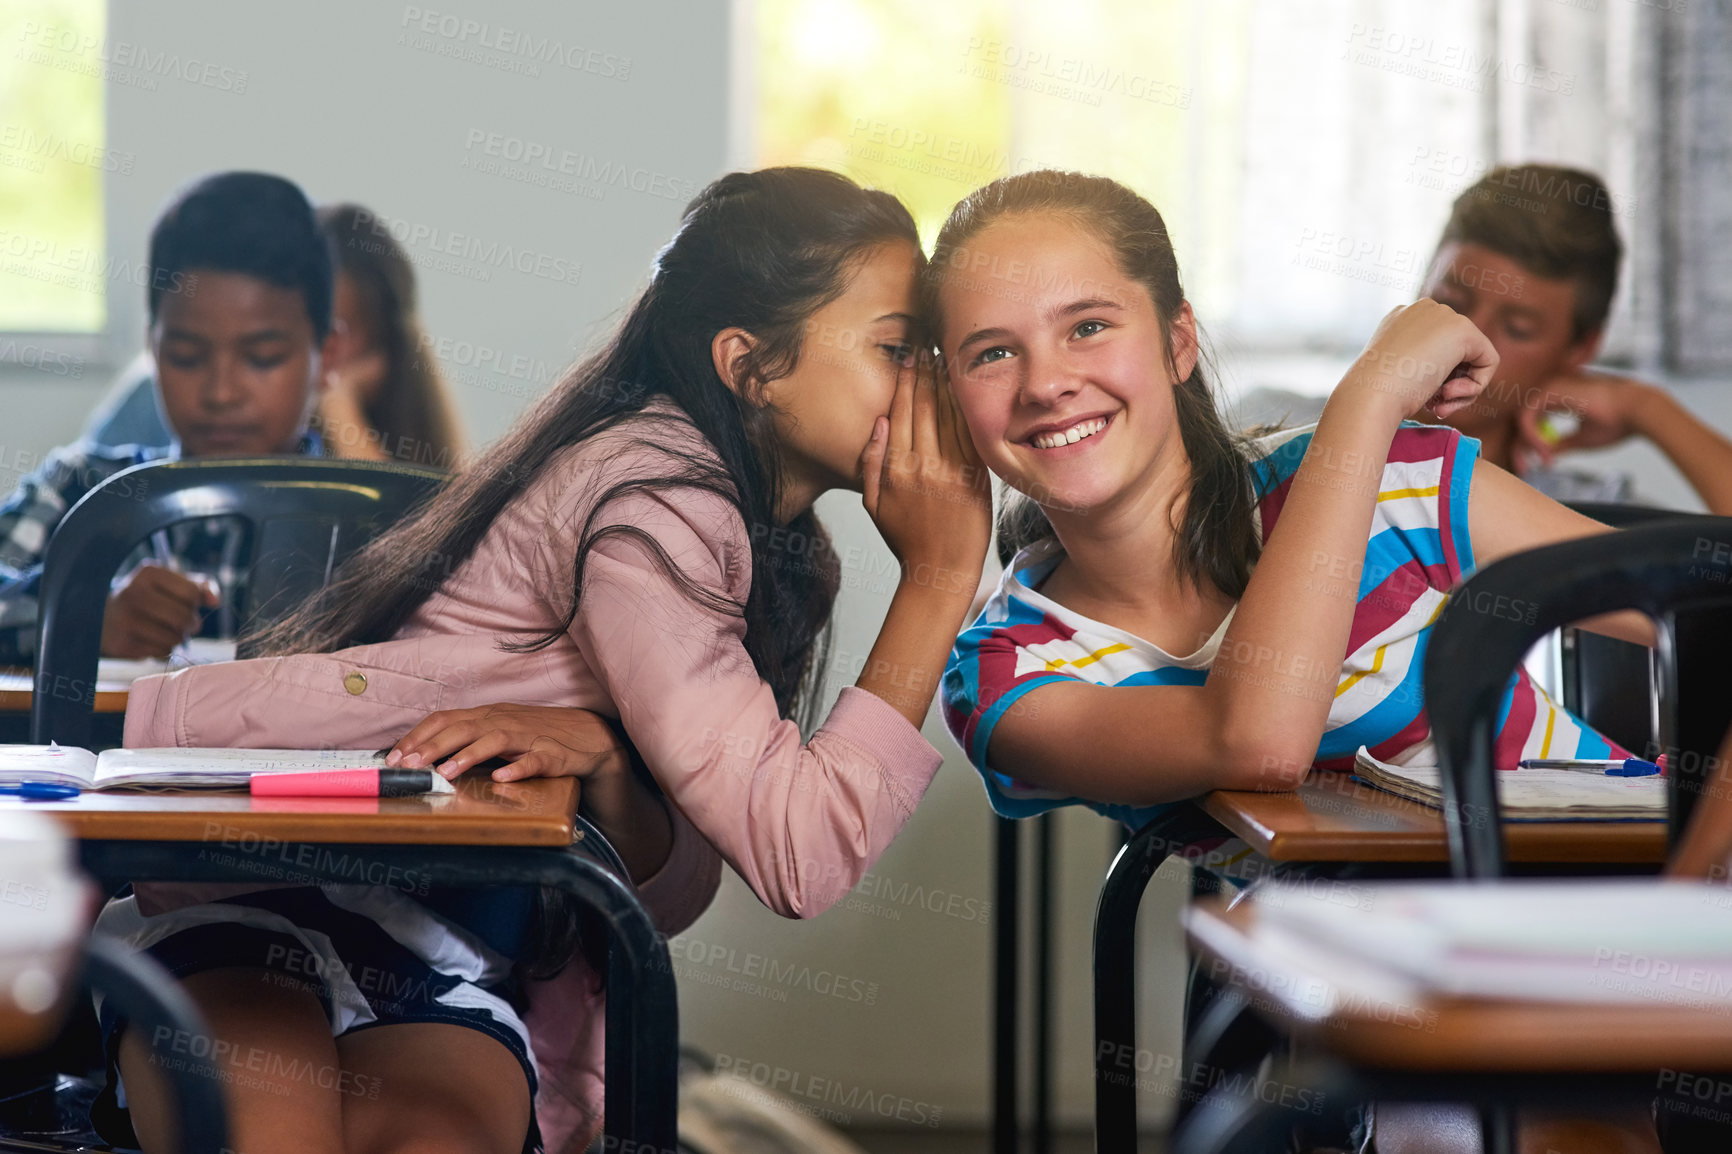 Buy stock photo Shot of a young schoolgirl whispering a secret to her friend in class